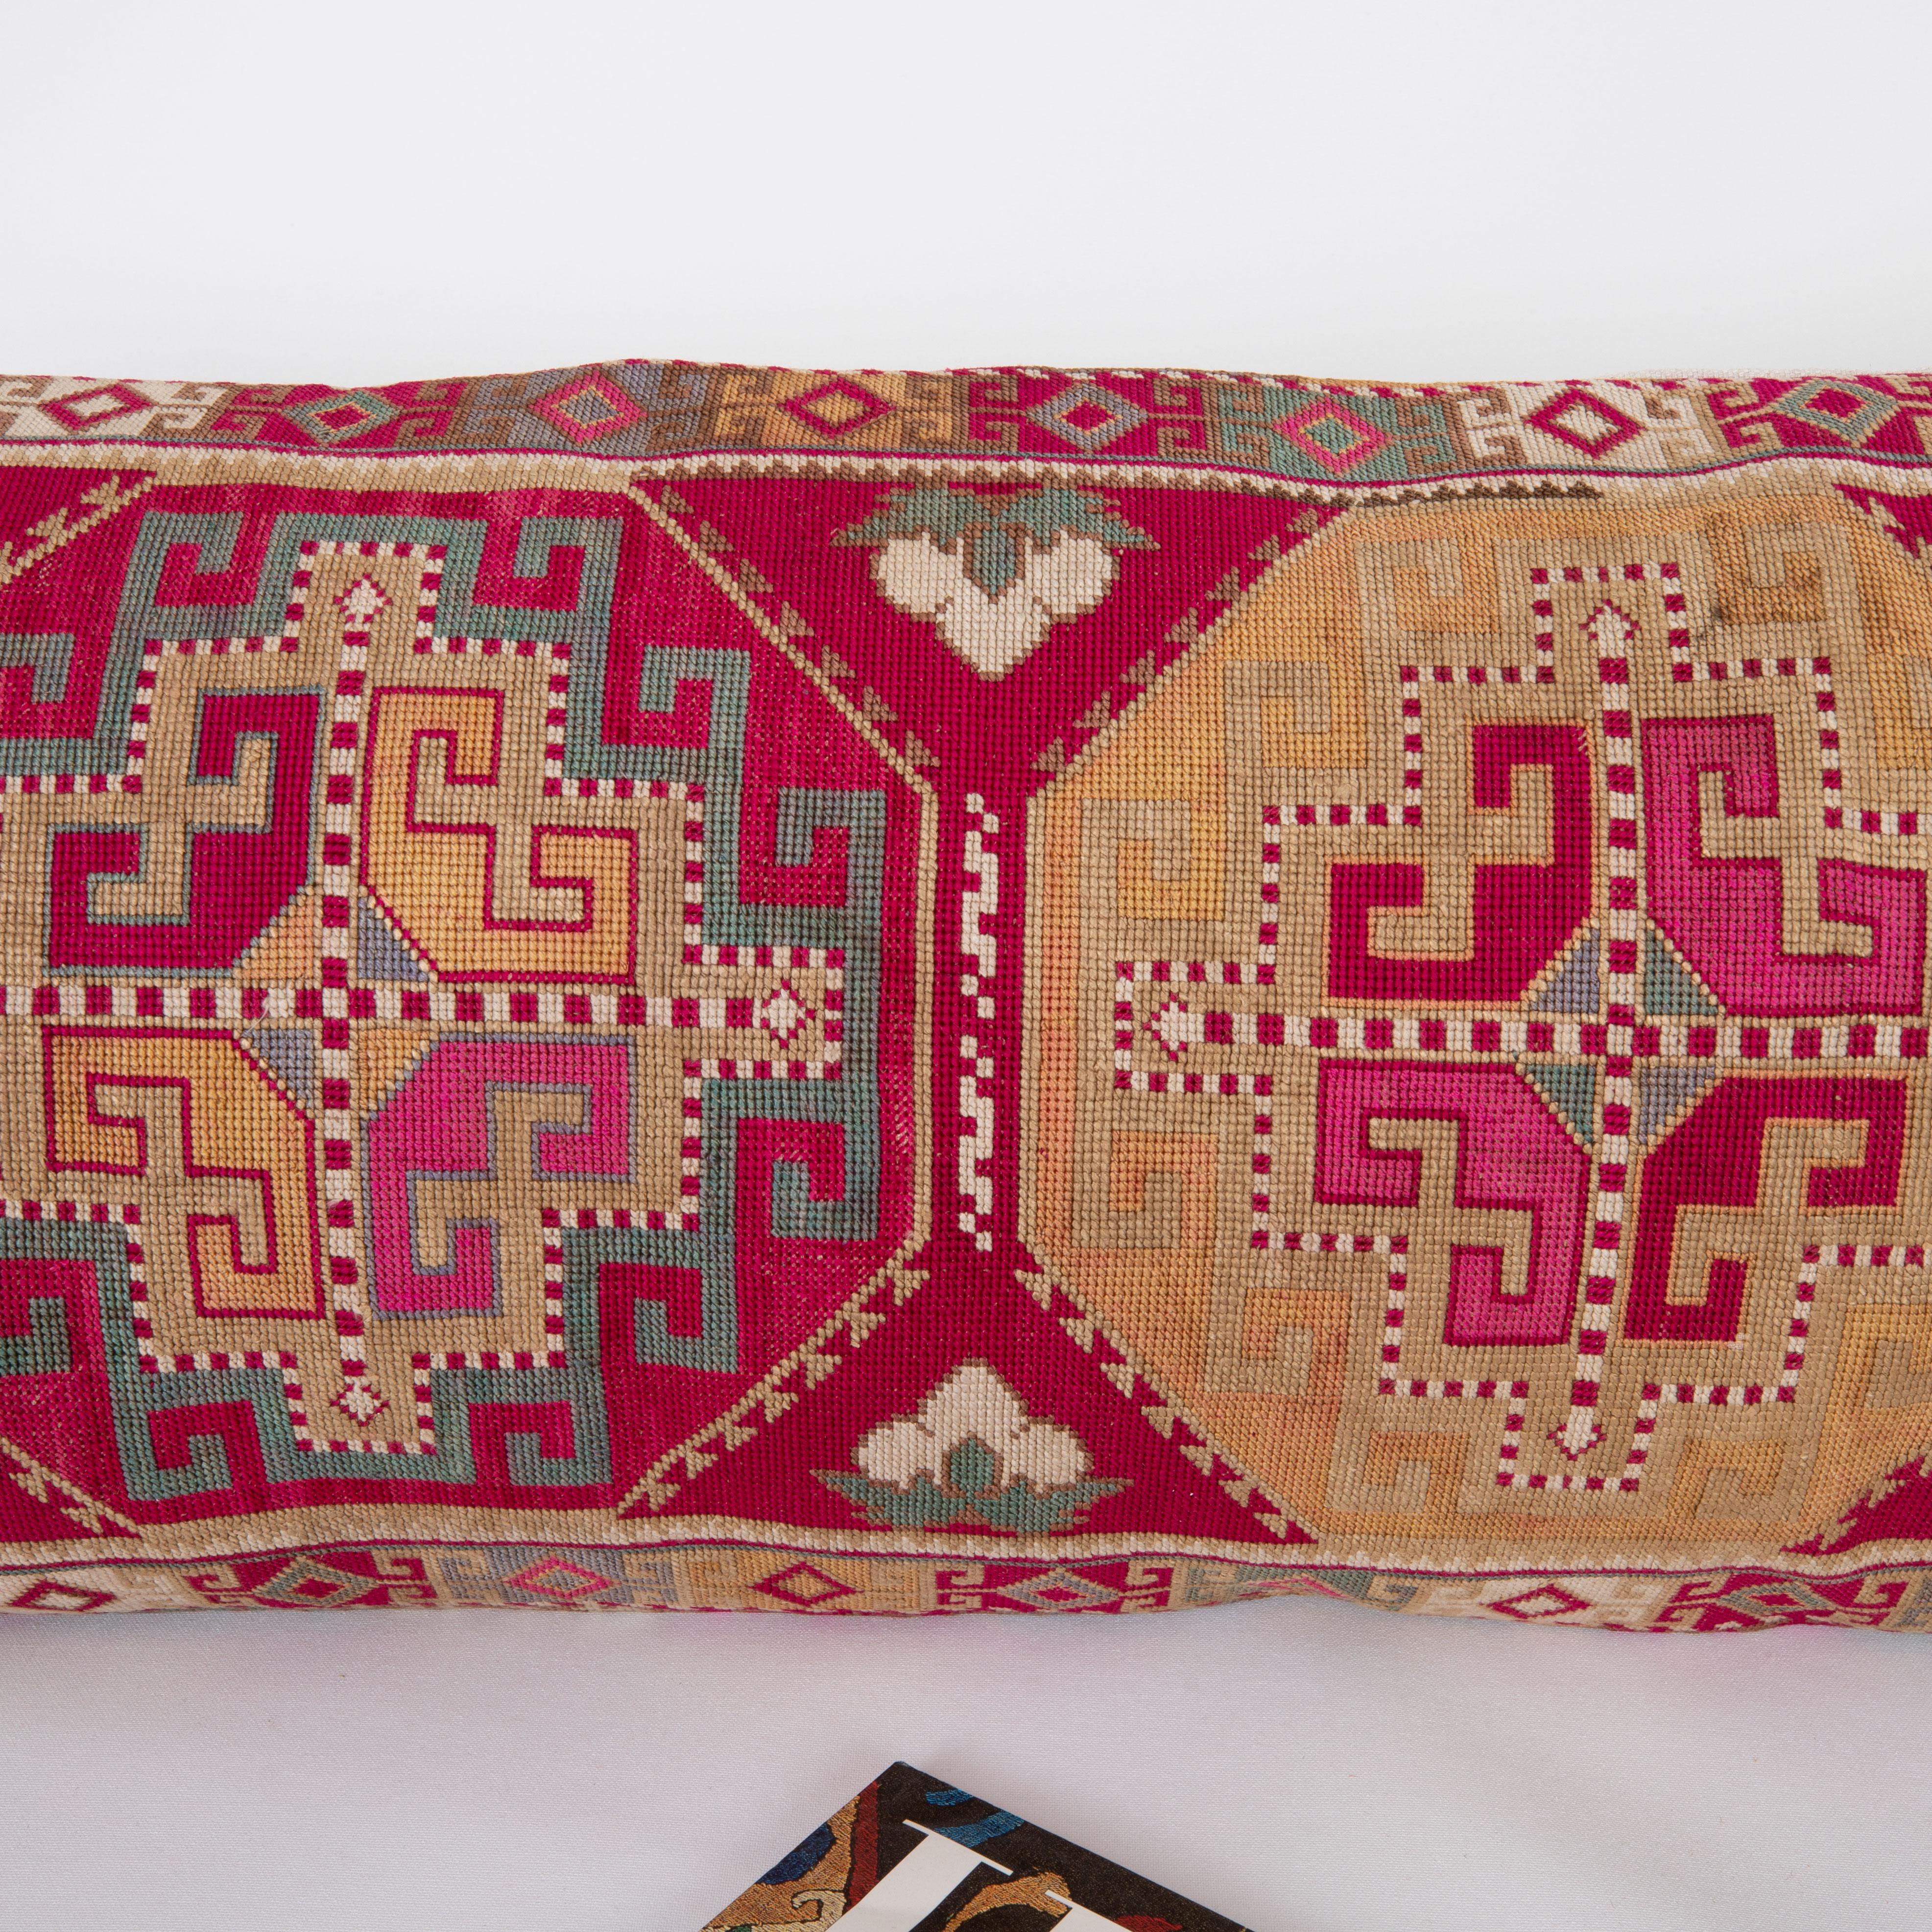 Embroidered Pillow Cover, Made from a 1970s/80s silk mafrash ( storage bag ) Panel For Sale